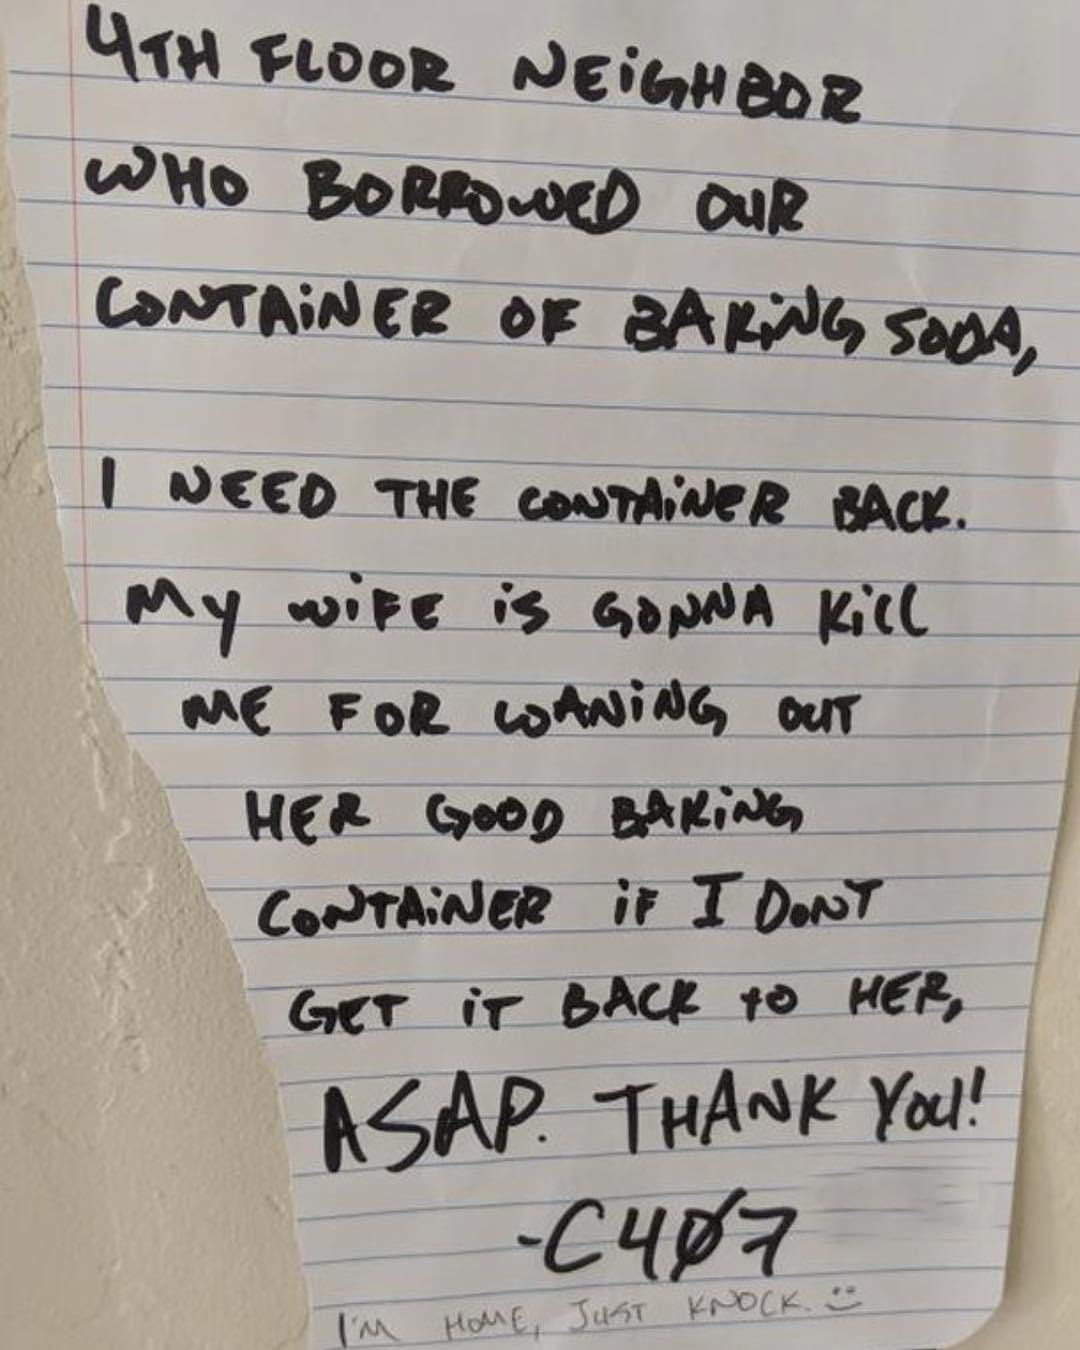 nightmare neighbor handwriting - 4TH Floor Neighbor Who Borrowed Our Container Of Baking Soda, I Need The Container SACk. My wife is Gonna Kill Me For WANiNG Out Her Good Baking Container if I Don'T Get It Back To Her, Asap. Thank You! C407 I'M Home, Just